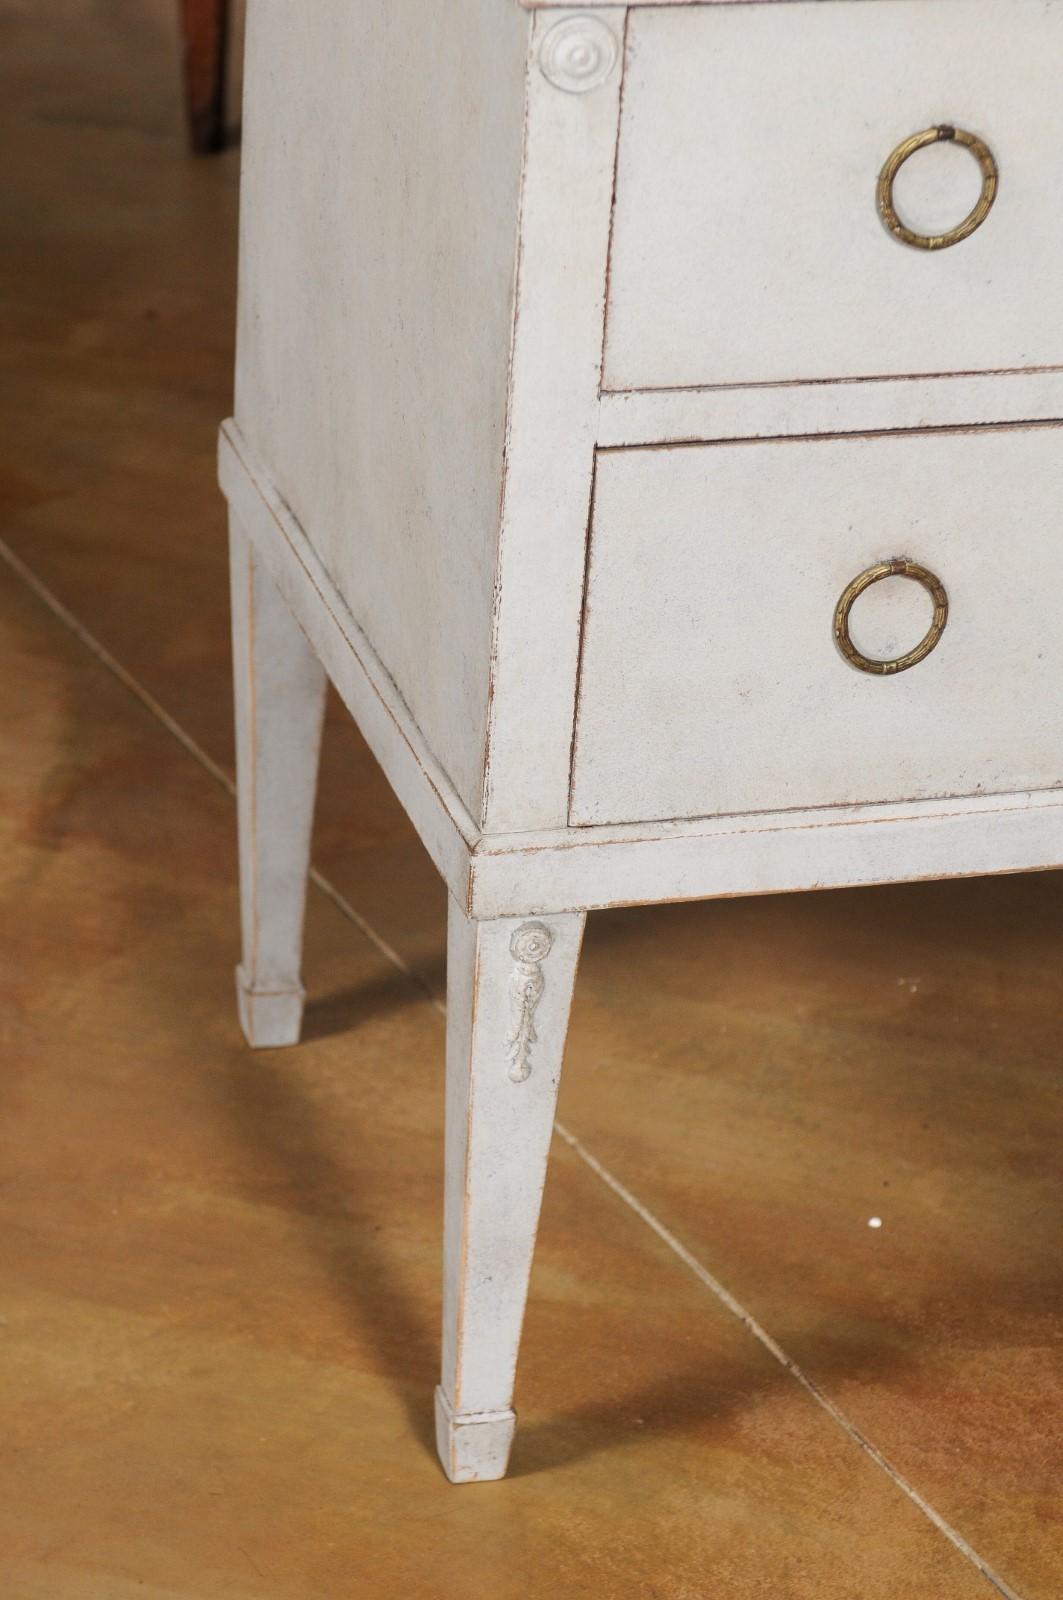 A Swedish Gustavian style chest of drawers from the 20th century with tapered legs and carved medallions. Charming our eyes with its clean lines and soft finish, this Gustavian style chest features a rectangular top sitting above two drawers each